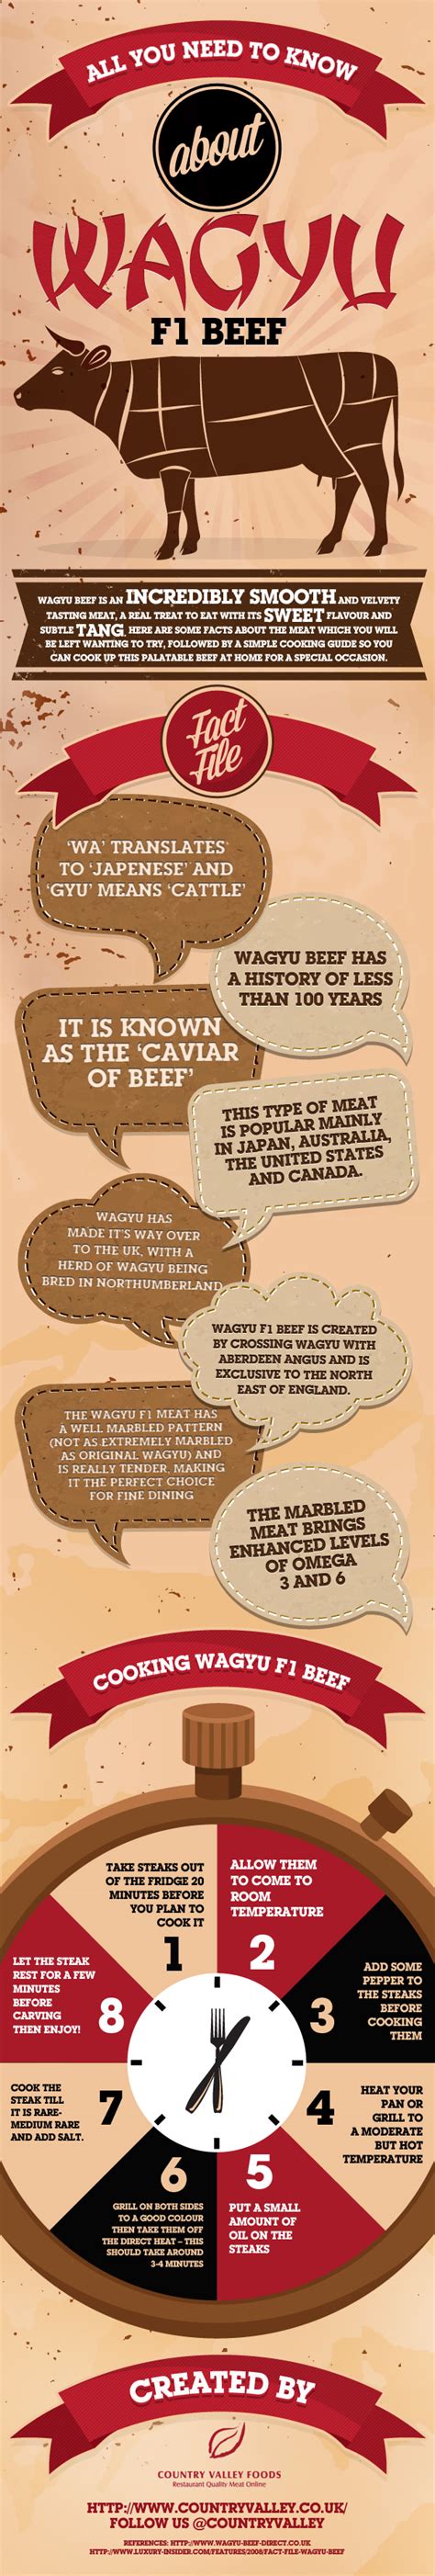 Infographic About Wagyu Beef Infographic Design Inspiration Wagyu Infographic